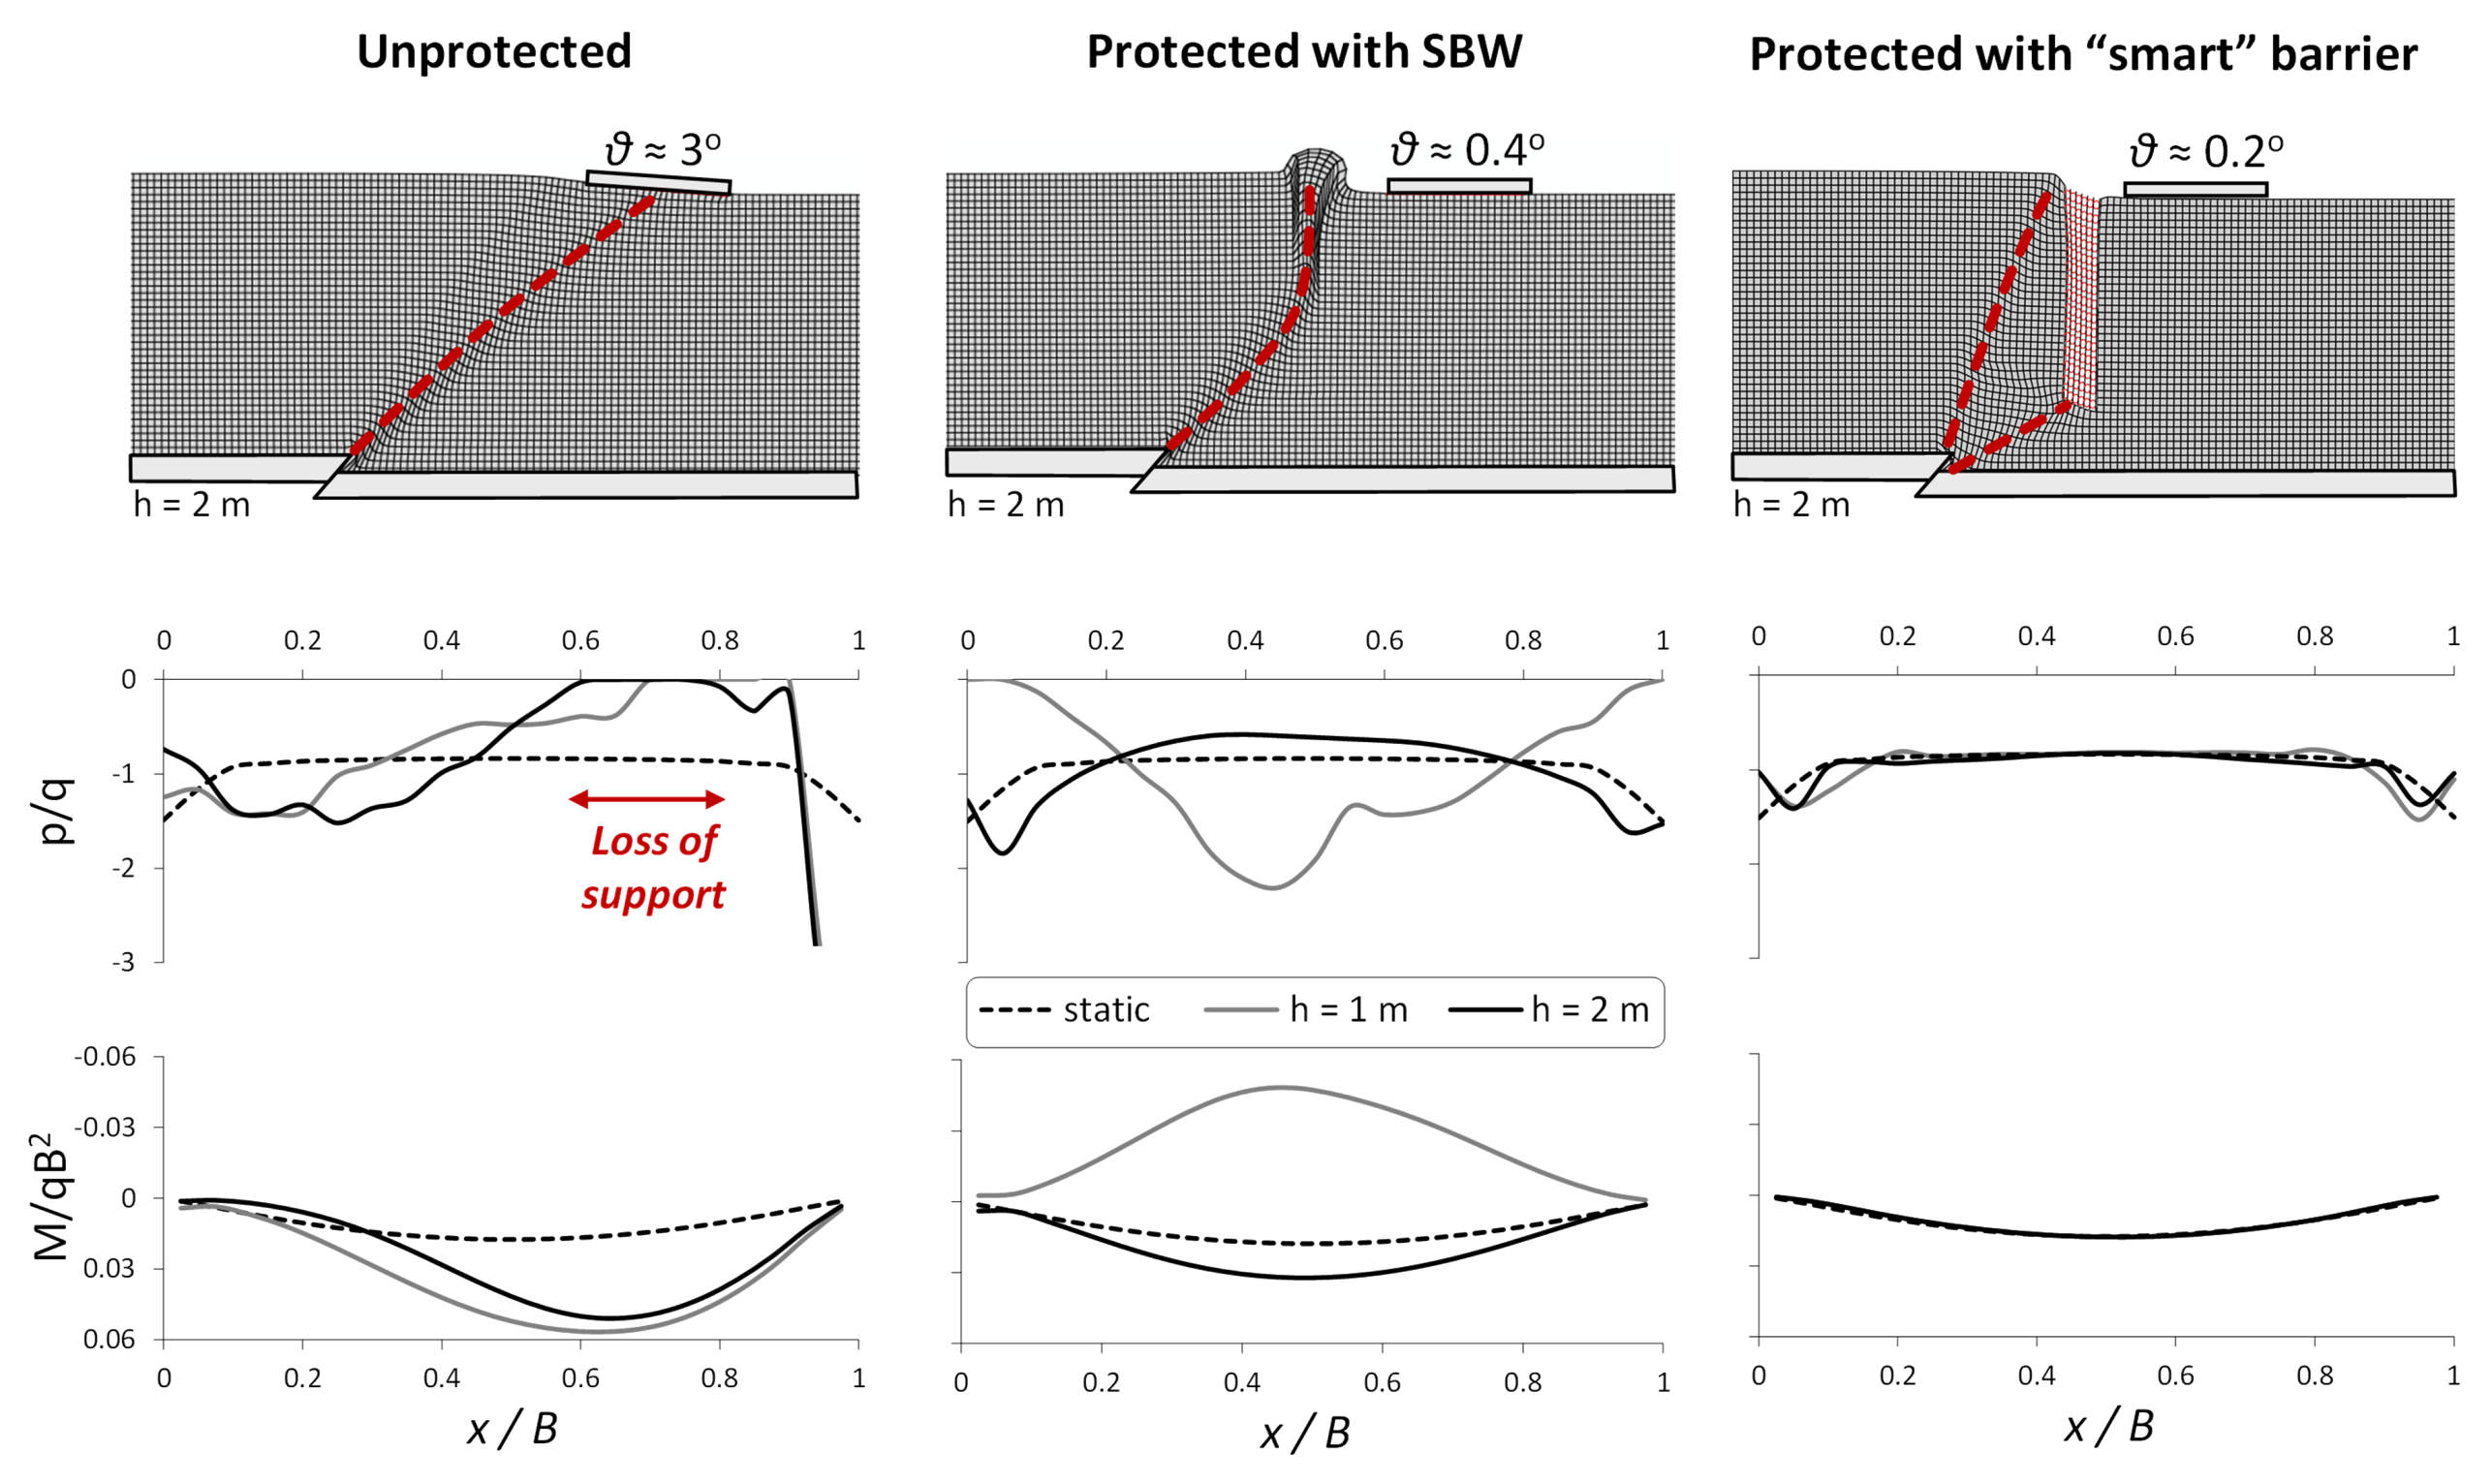 Comparison of the unprotected foundation to protection using a weak SBW barrier and the “smart” barrier: deformed FE mesh showing the fault rupture diversion (top); normalized foundation pressures (middle); and normalized foundation bending moment